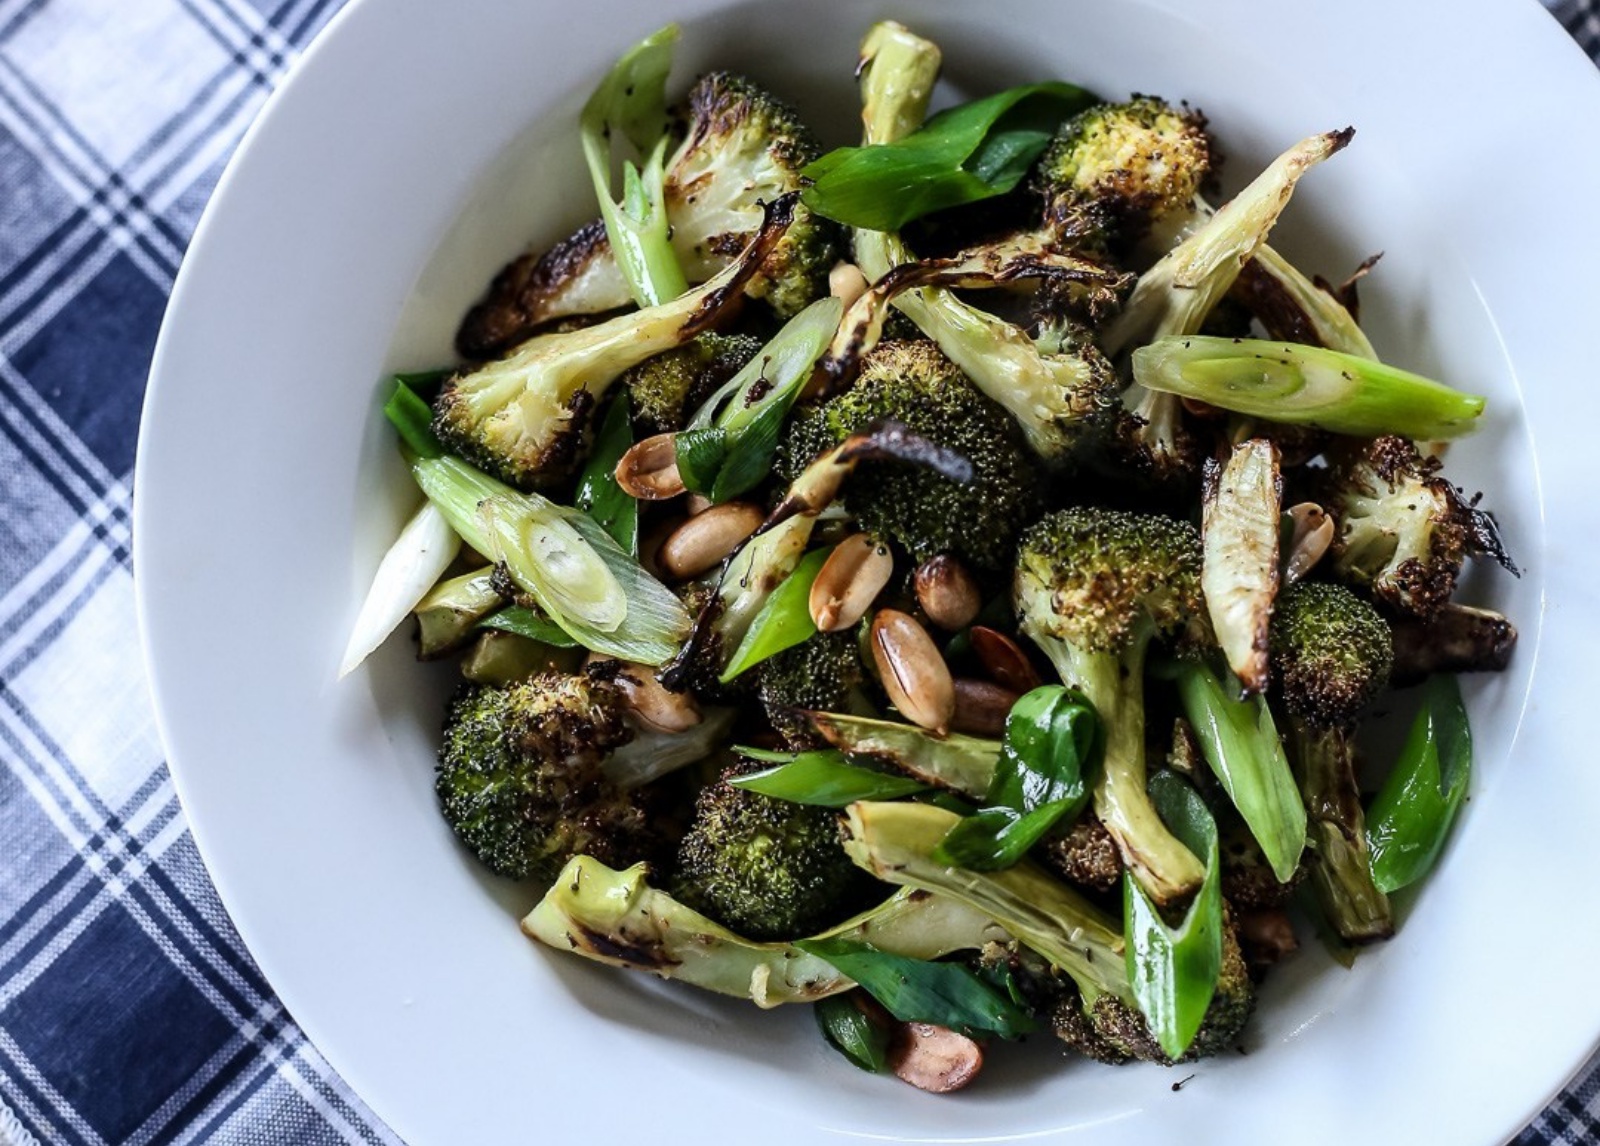 Roasted Charred Broccoli With Peanuts